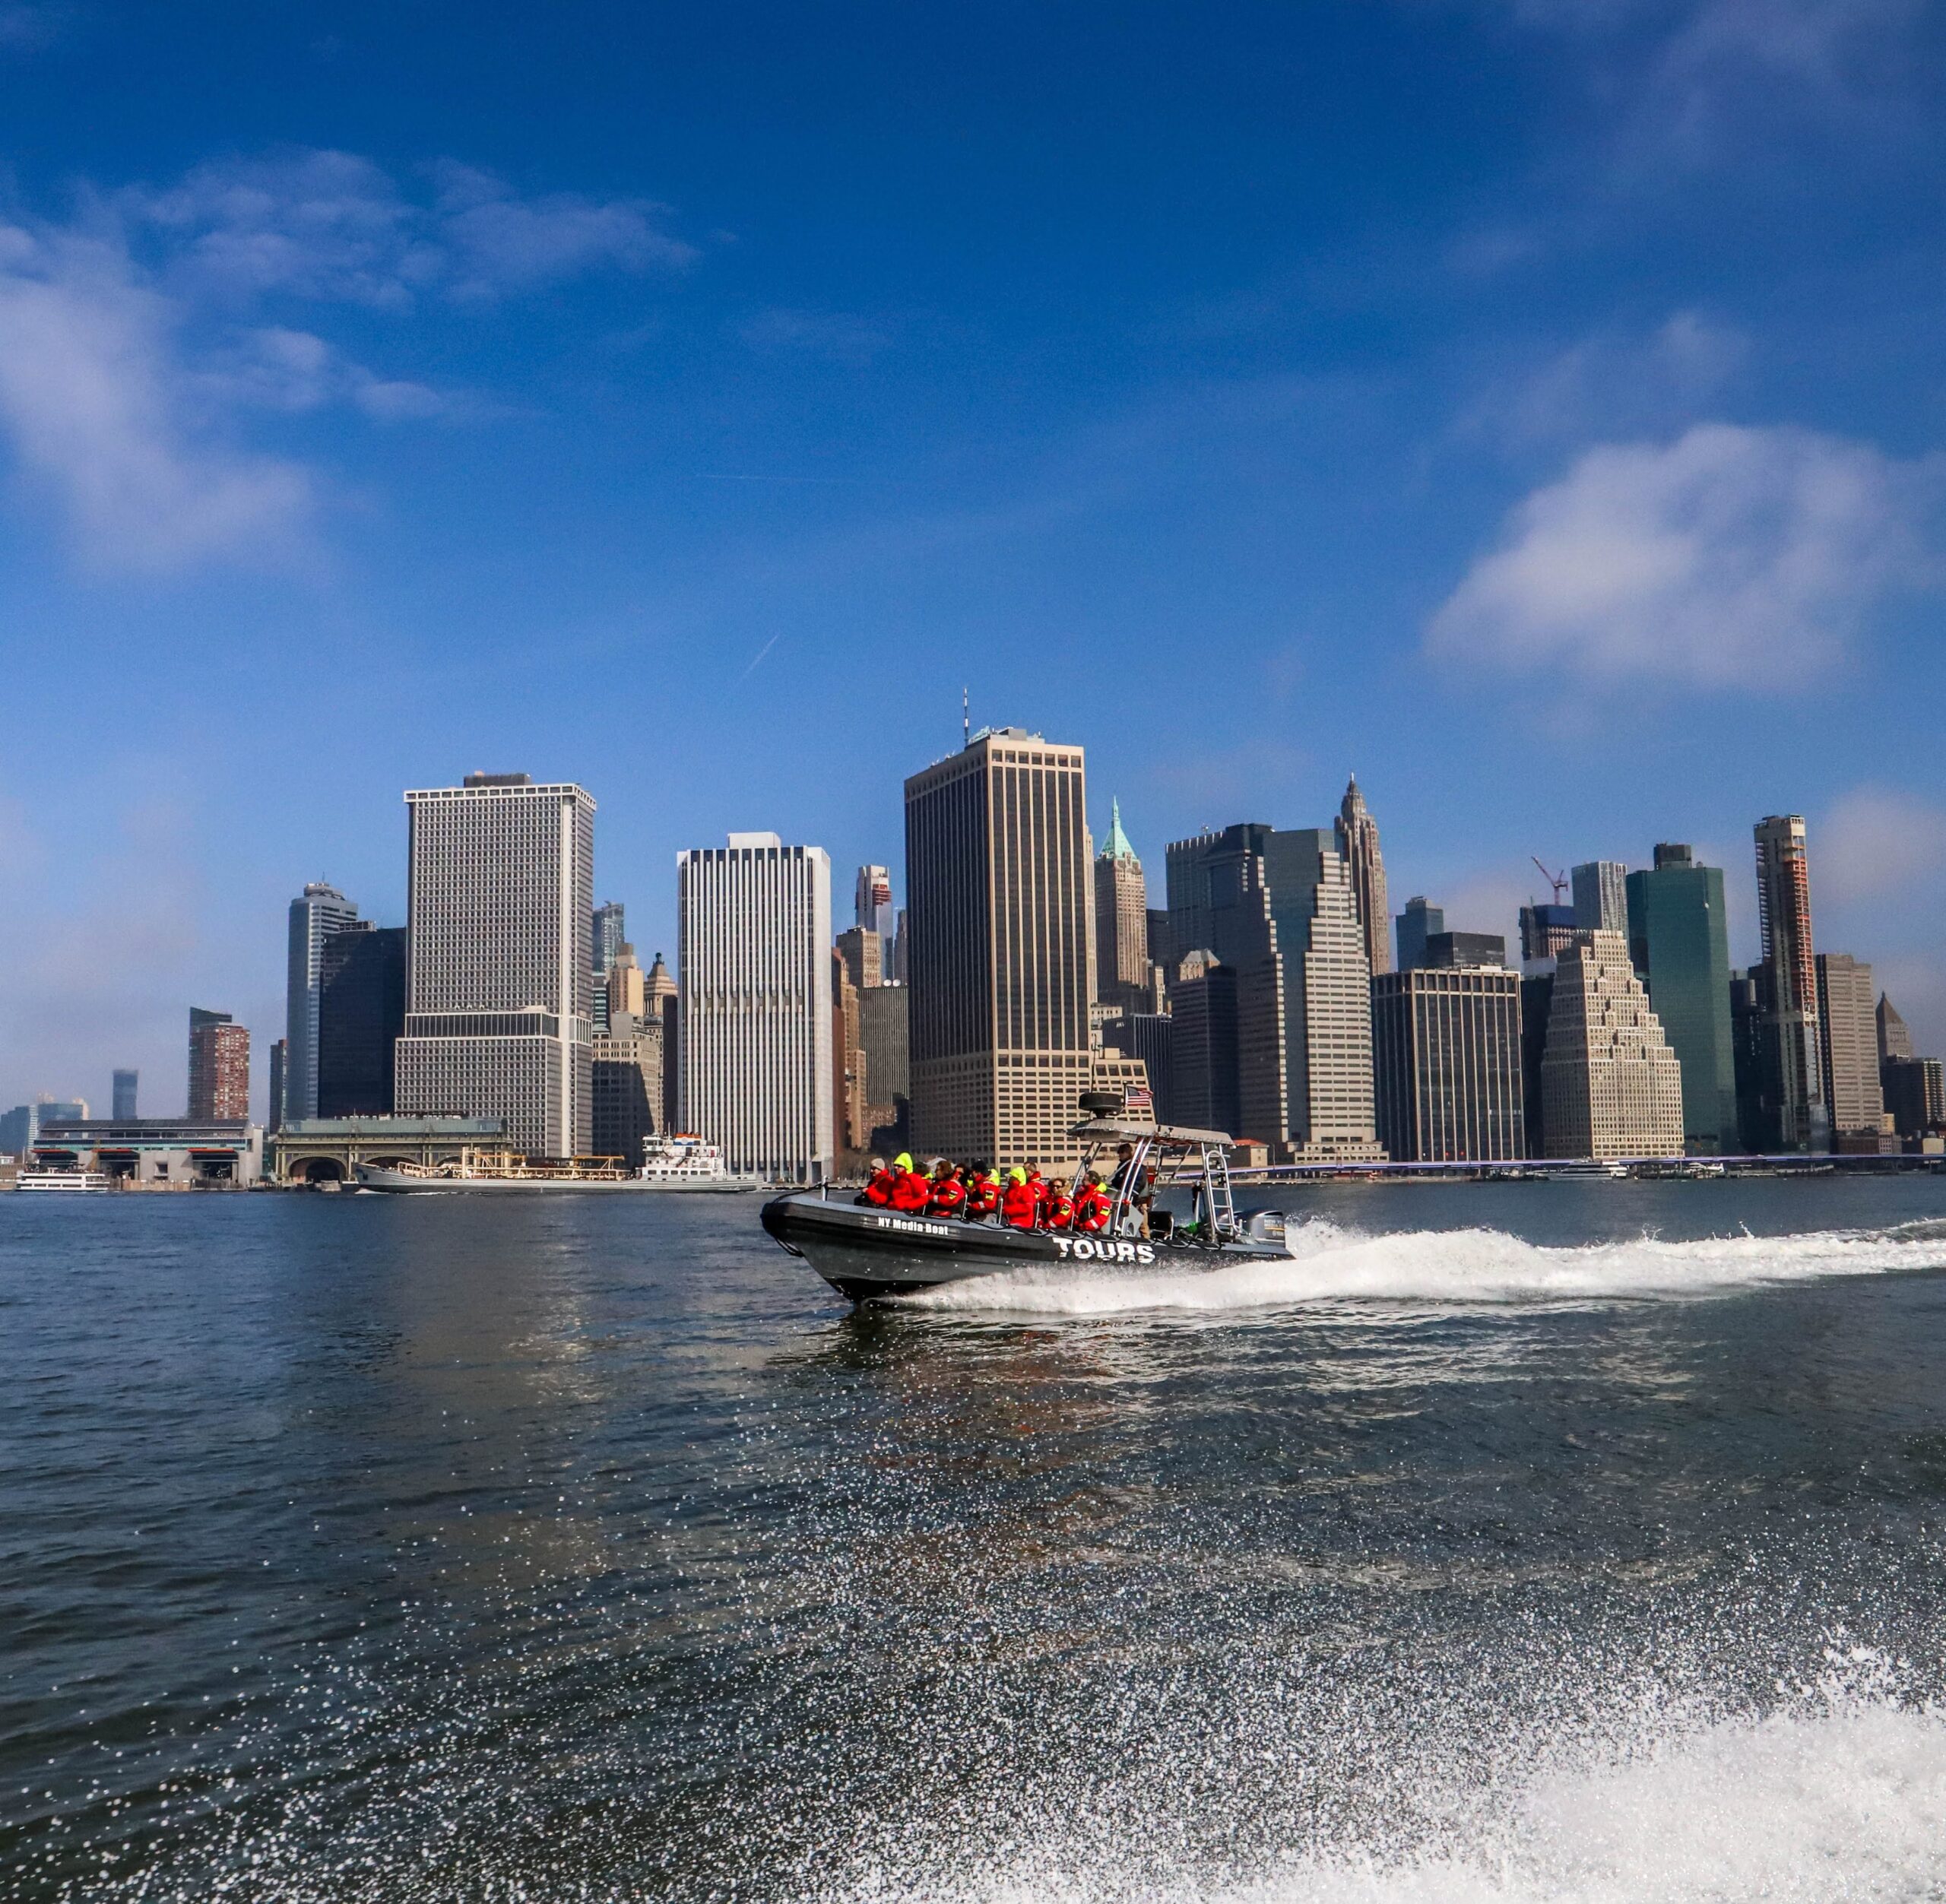 Breathtaking Boat Tour – Water Views of the City